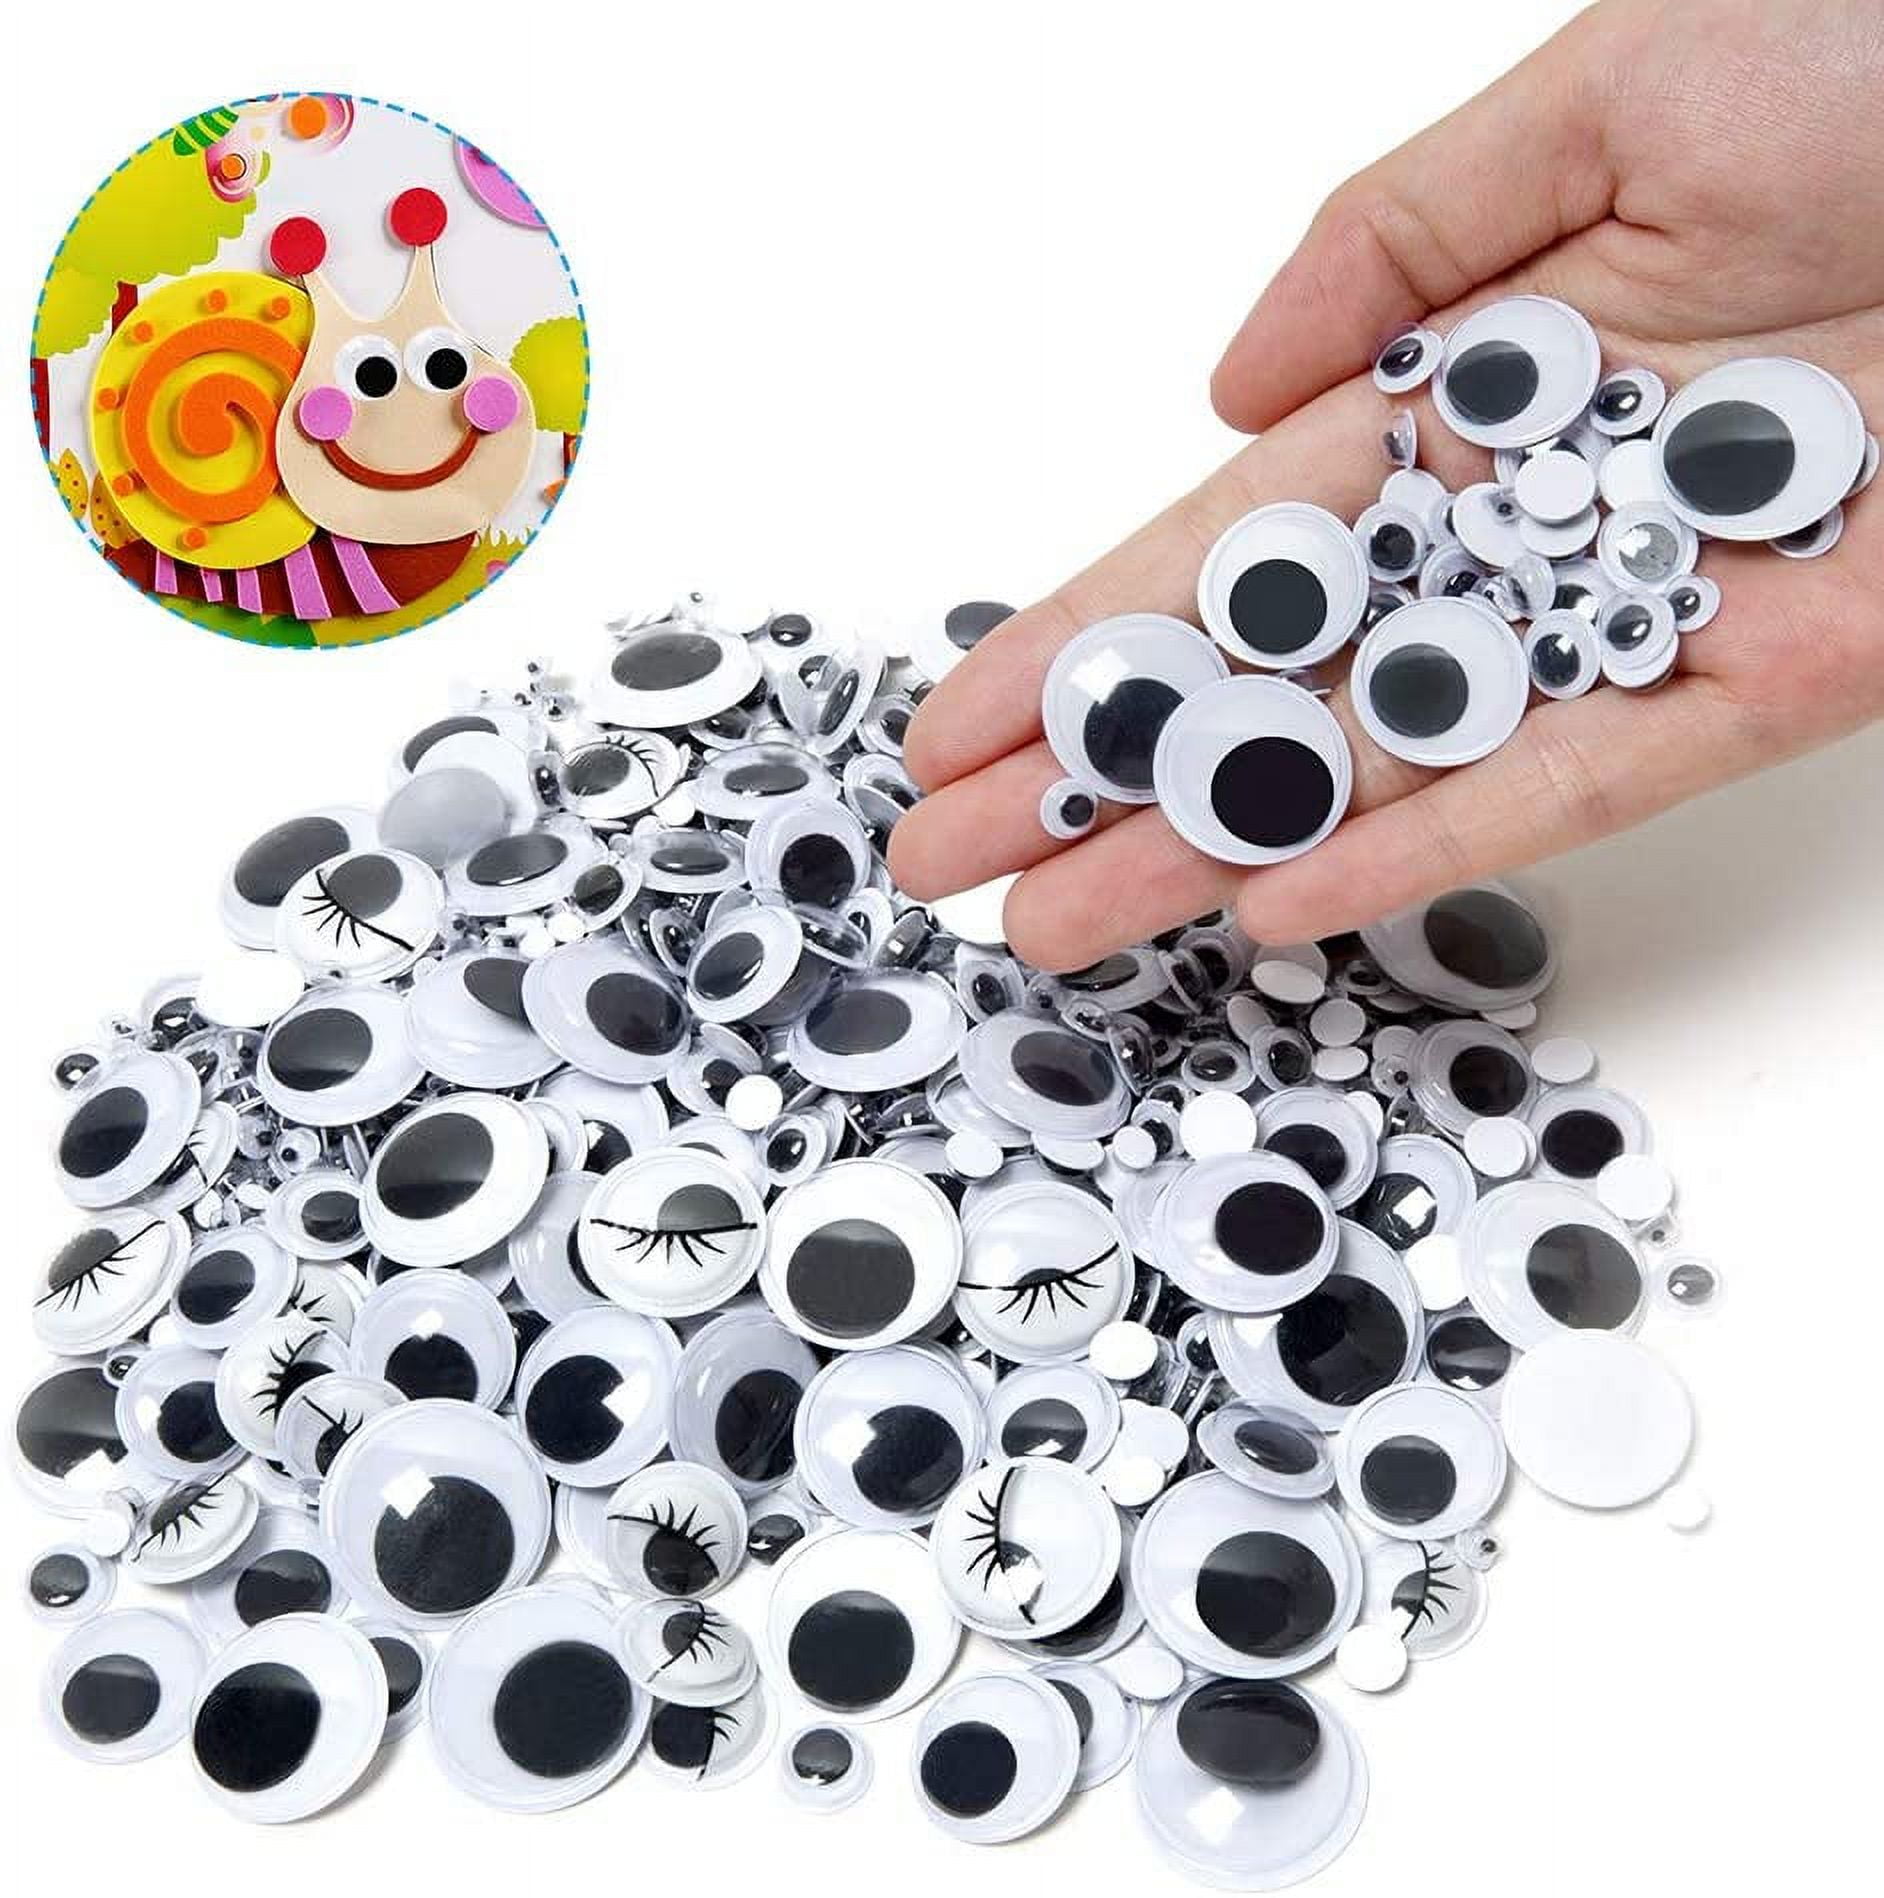 Essentials by Leisure Arts Eyes Paste On Moveable 15mm Black 96pc Googly  Eyes, Google Eyes for Crafts, Big Googly Eyes for Crafts, Wiggle Eyes,  Craft Eyes